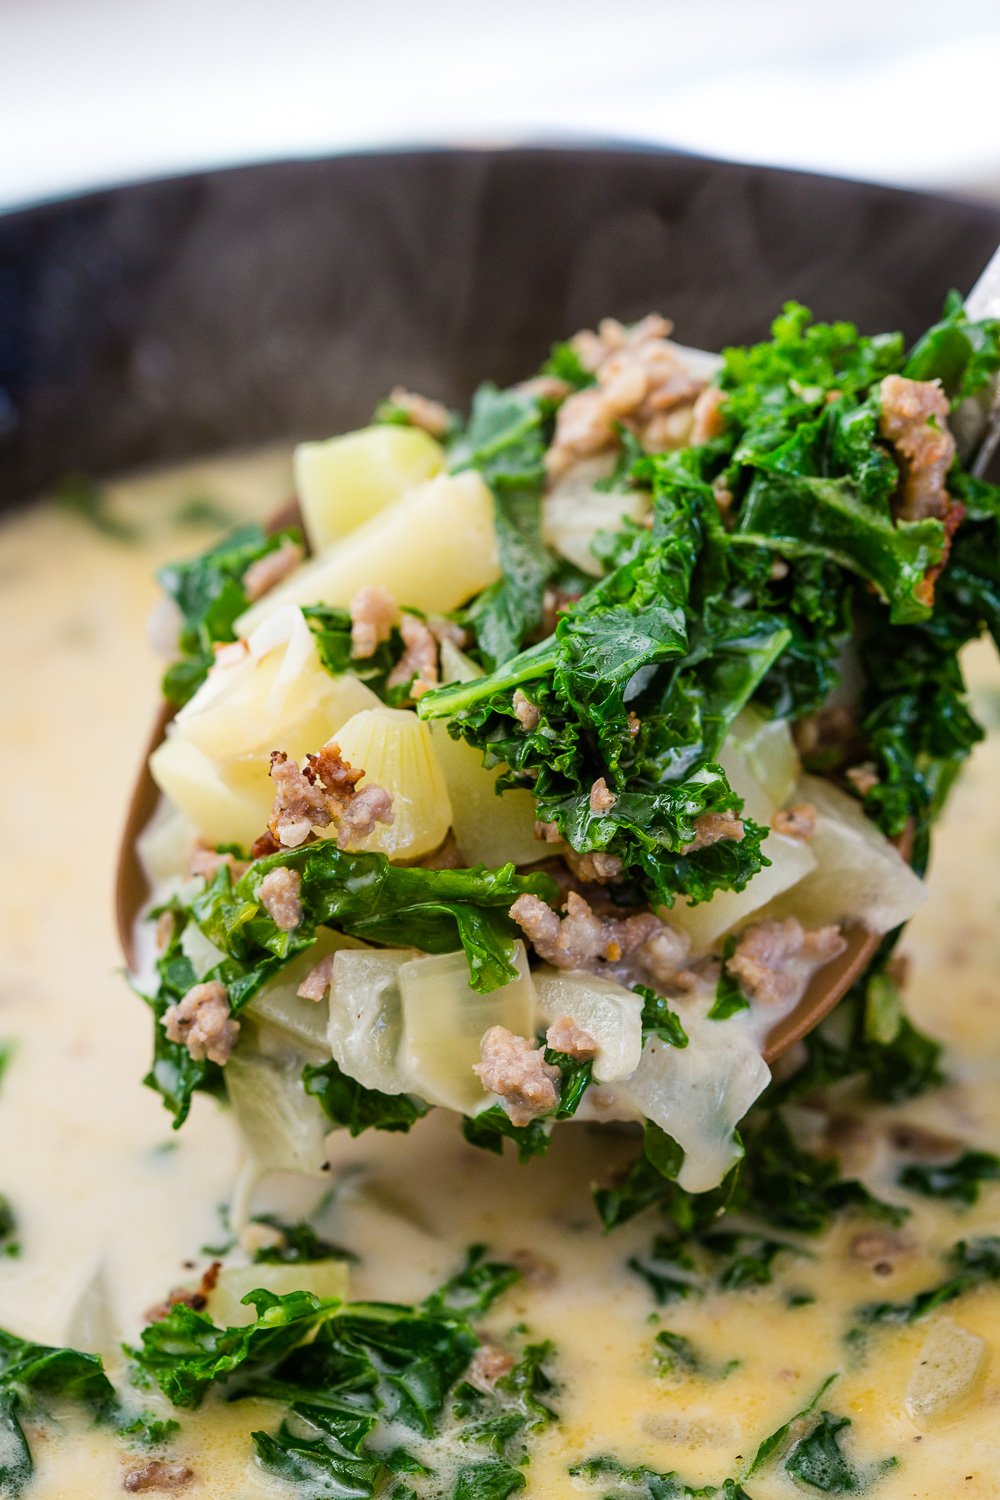 A ladle full of zuppa toscana, an olive garden copycat soup